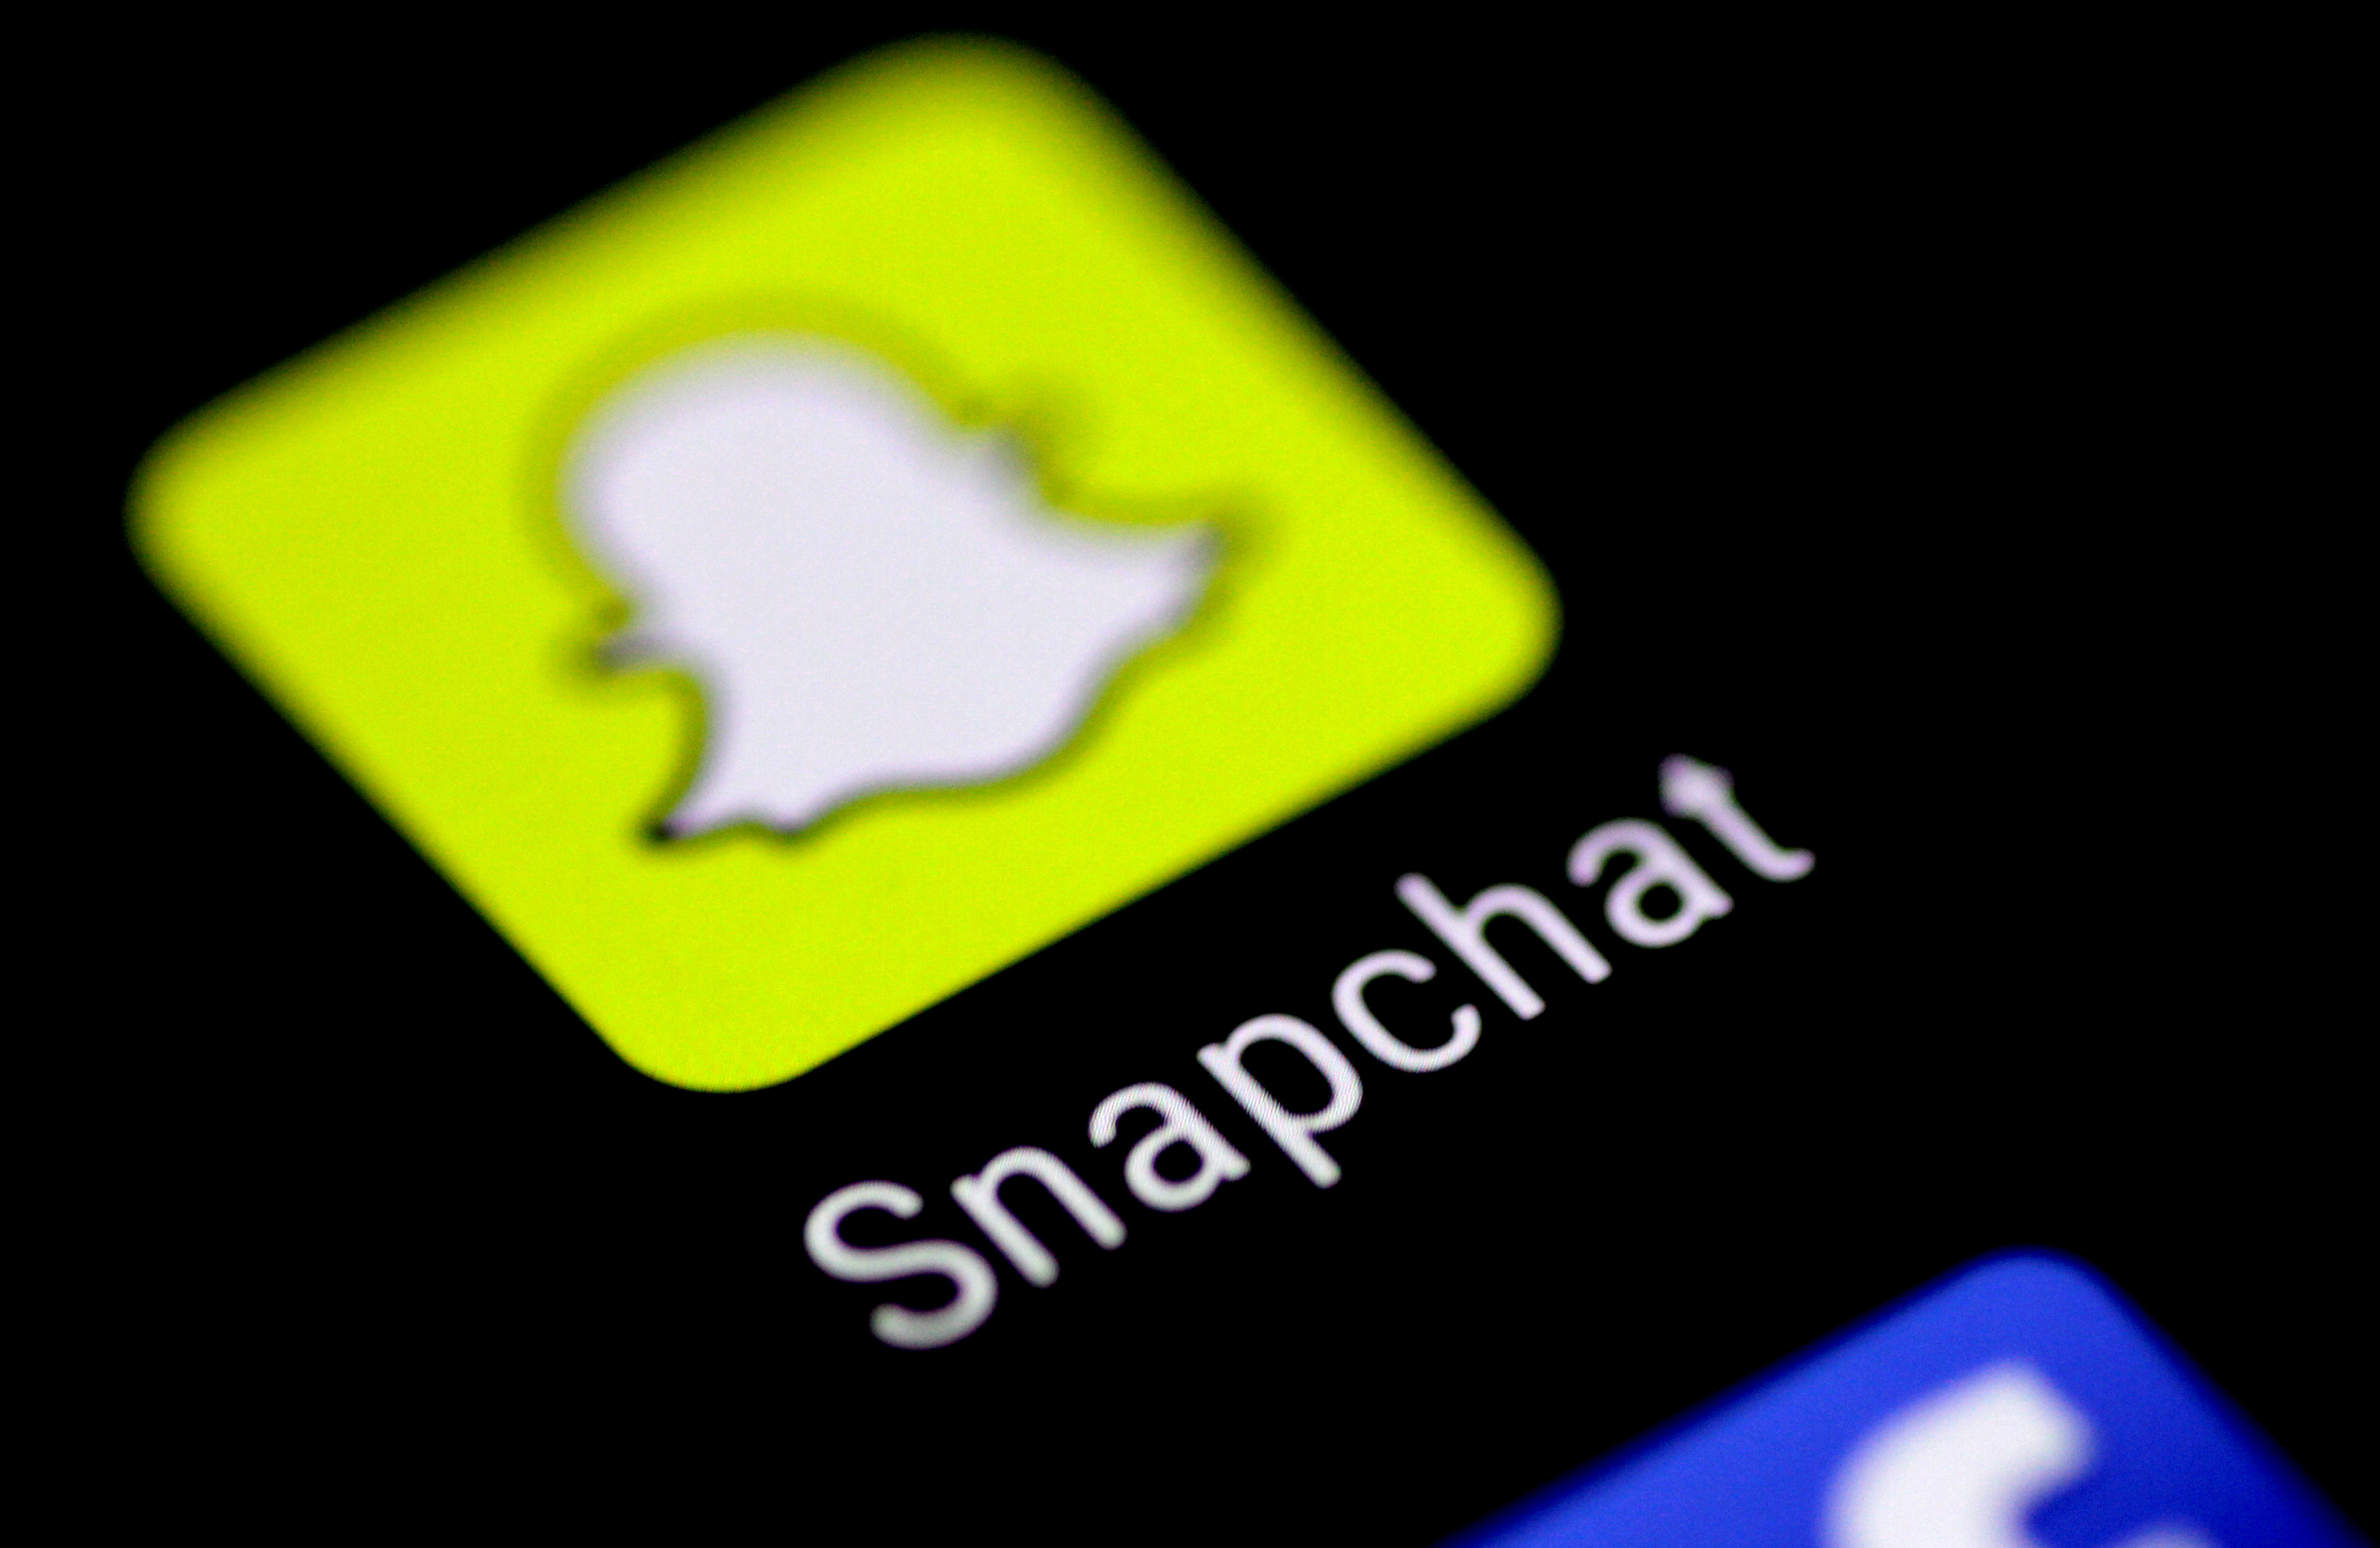 Man faces sex charges after using snapchat to lure girls: Halifax police